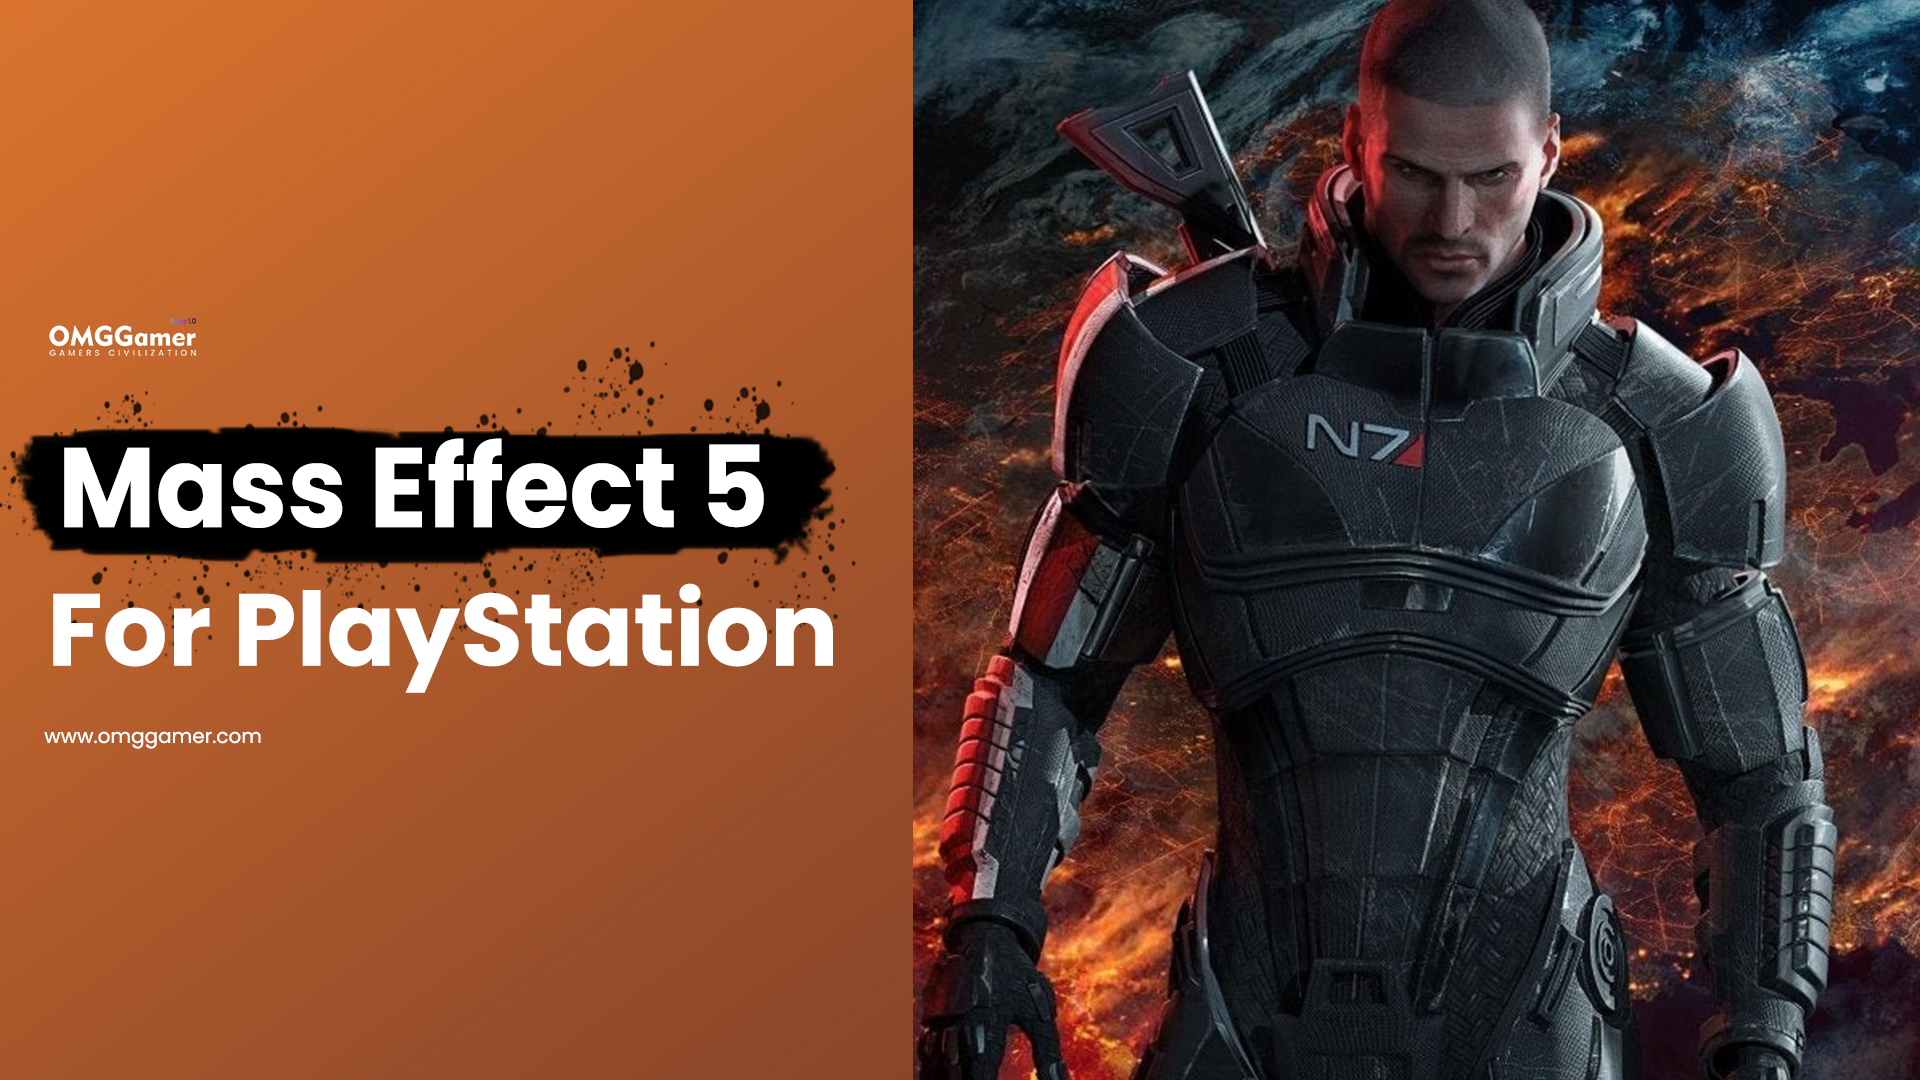 Mass Effect 5 for PlayStation